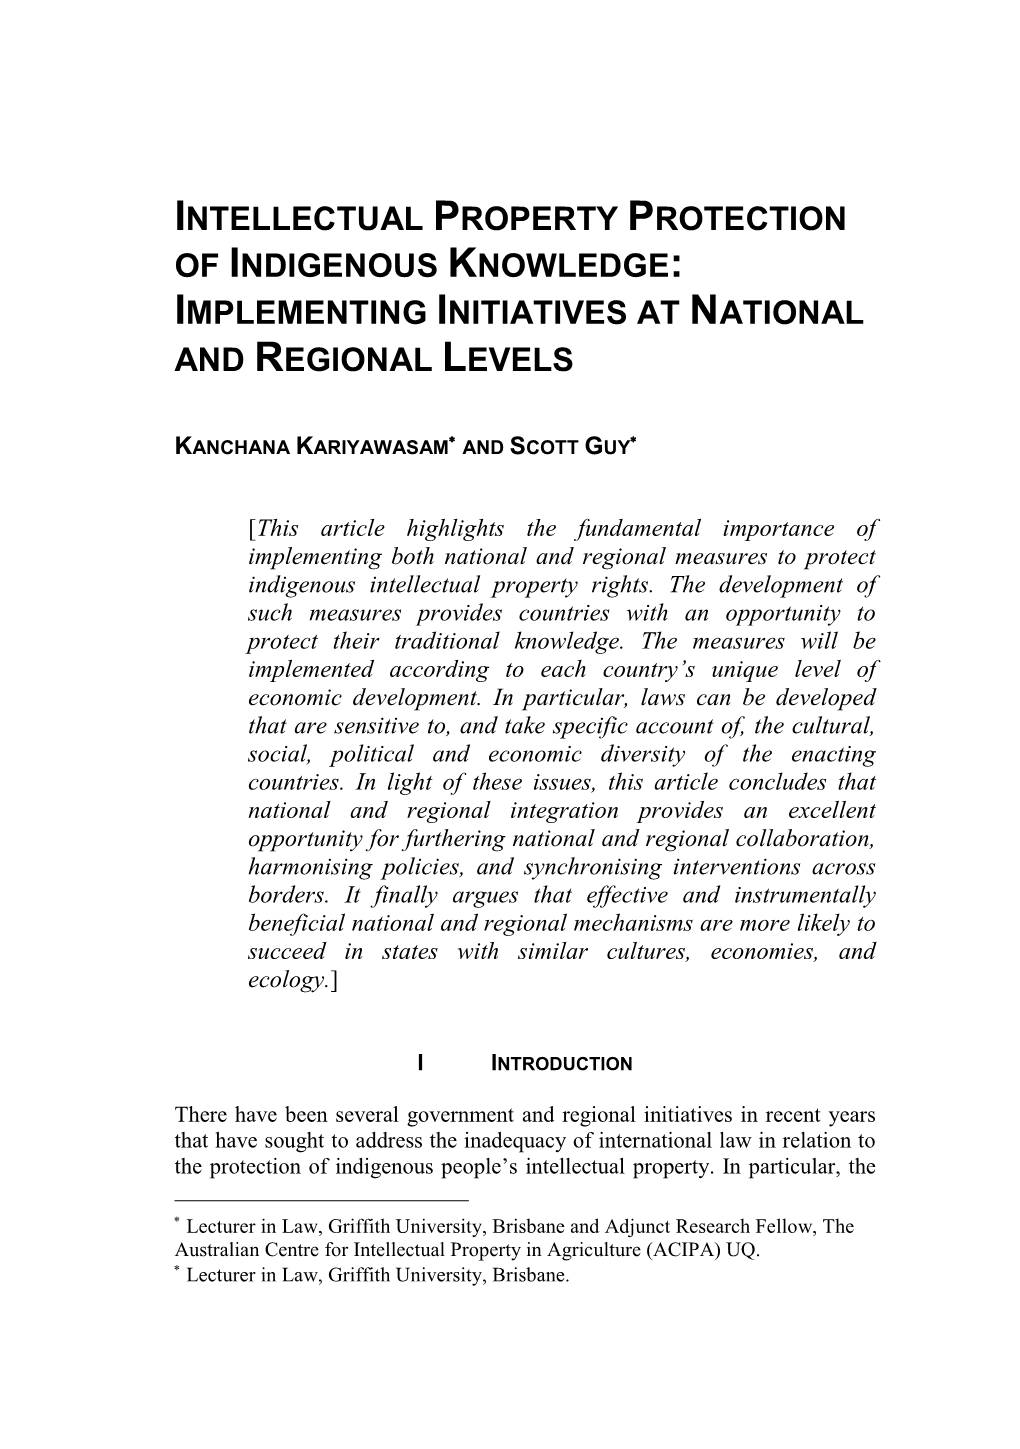 Intellectual Property Protection of Indigenous Knowledge: Implementing Initiatives at National and Regional Levels